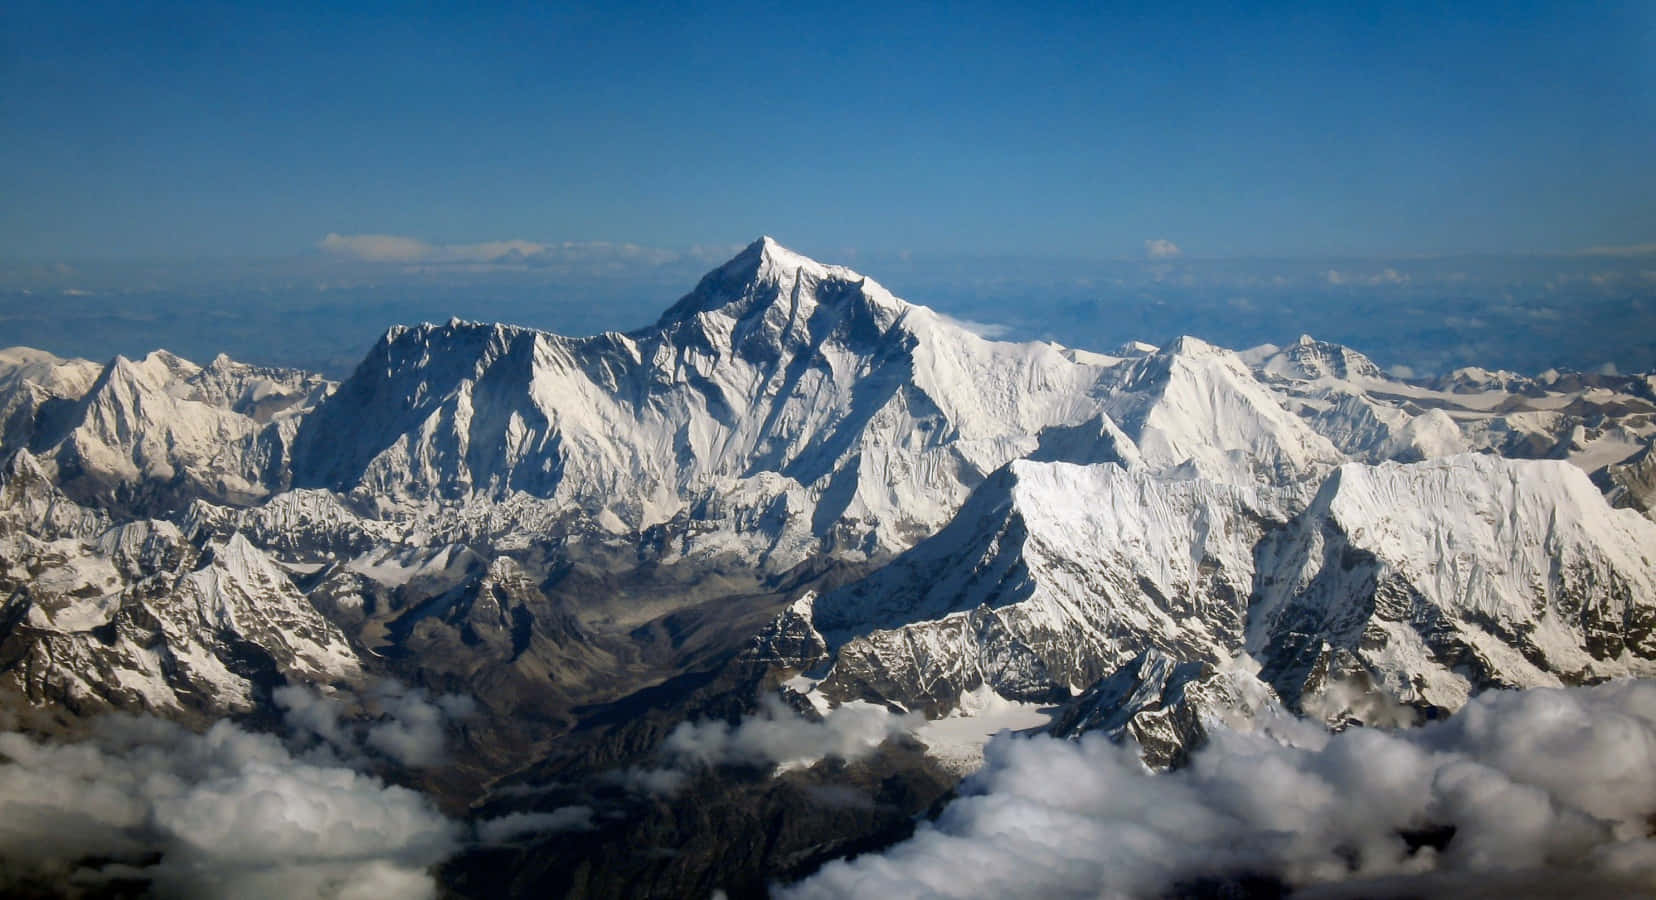 __ Spectacular view of Mt. Everest rising majestically above the clouds